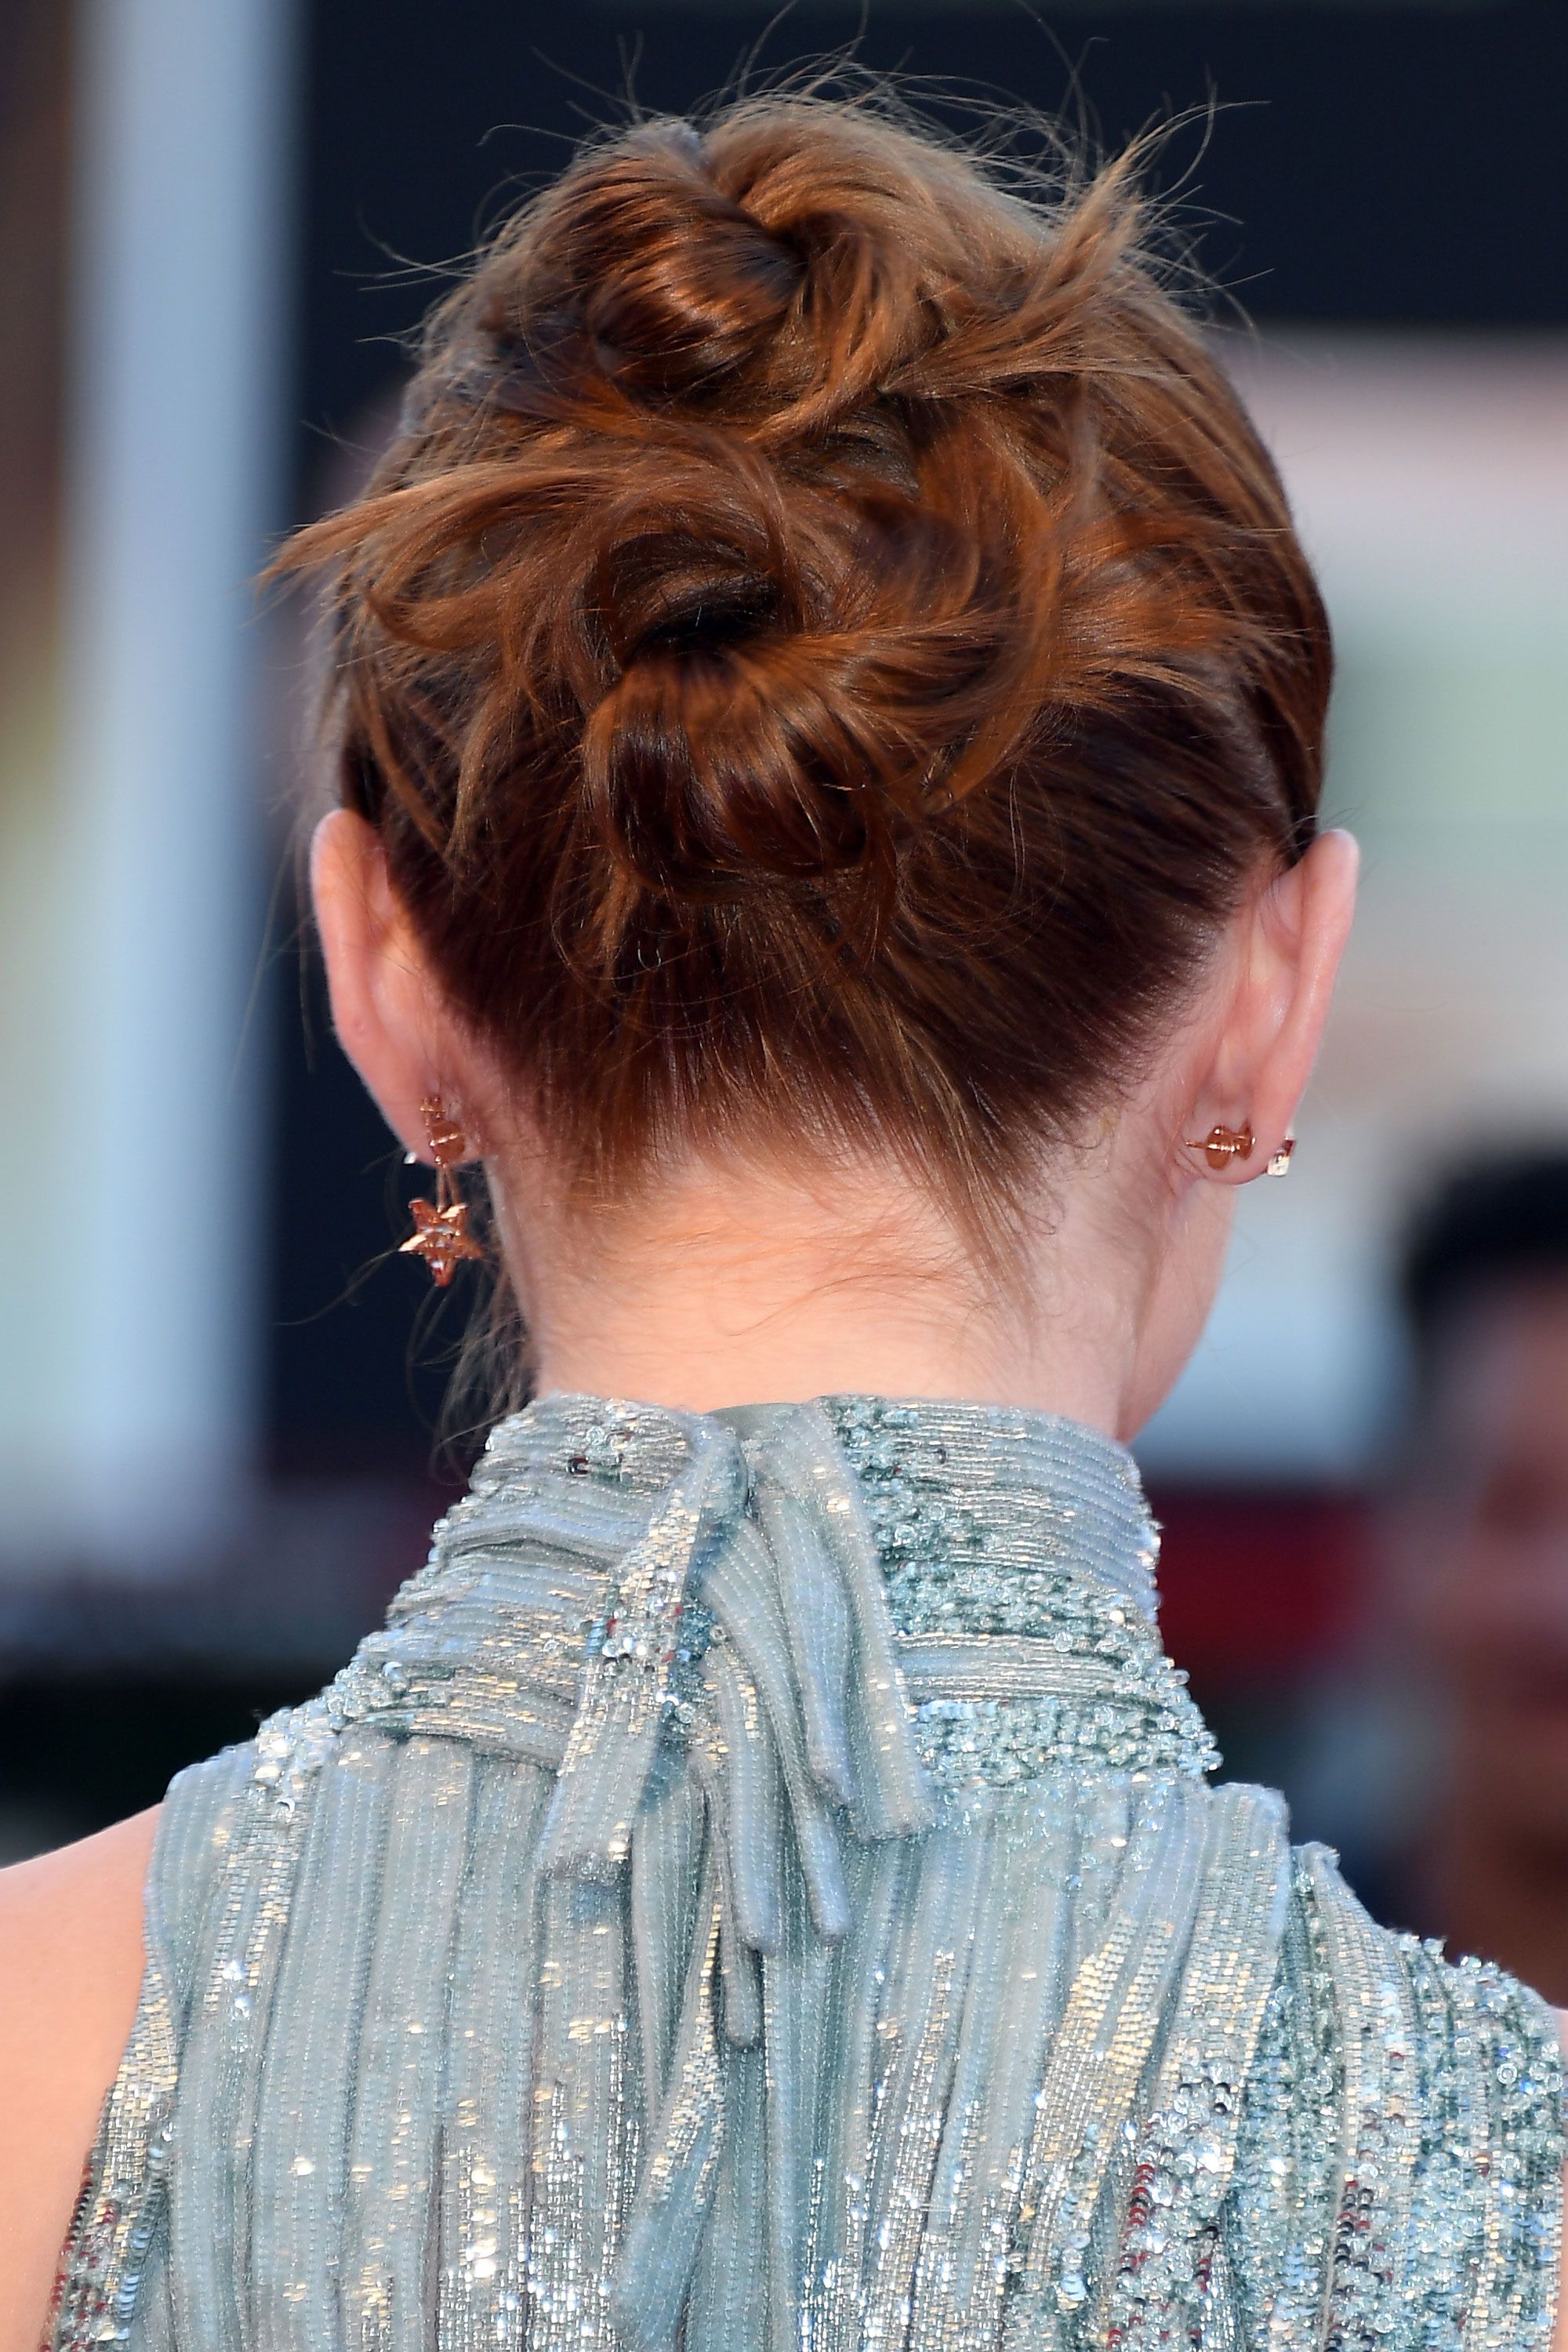 10 Best Updos For Long Hair How To Do An Updo